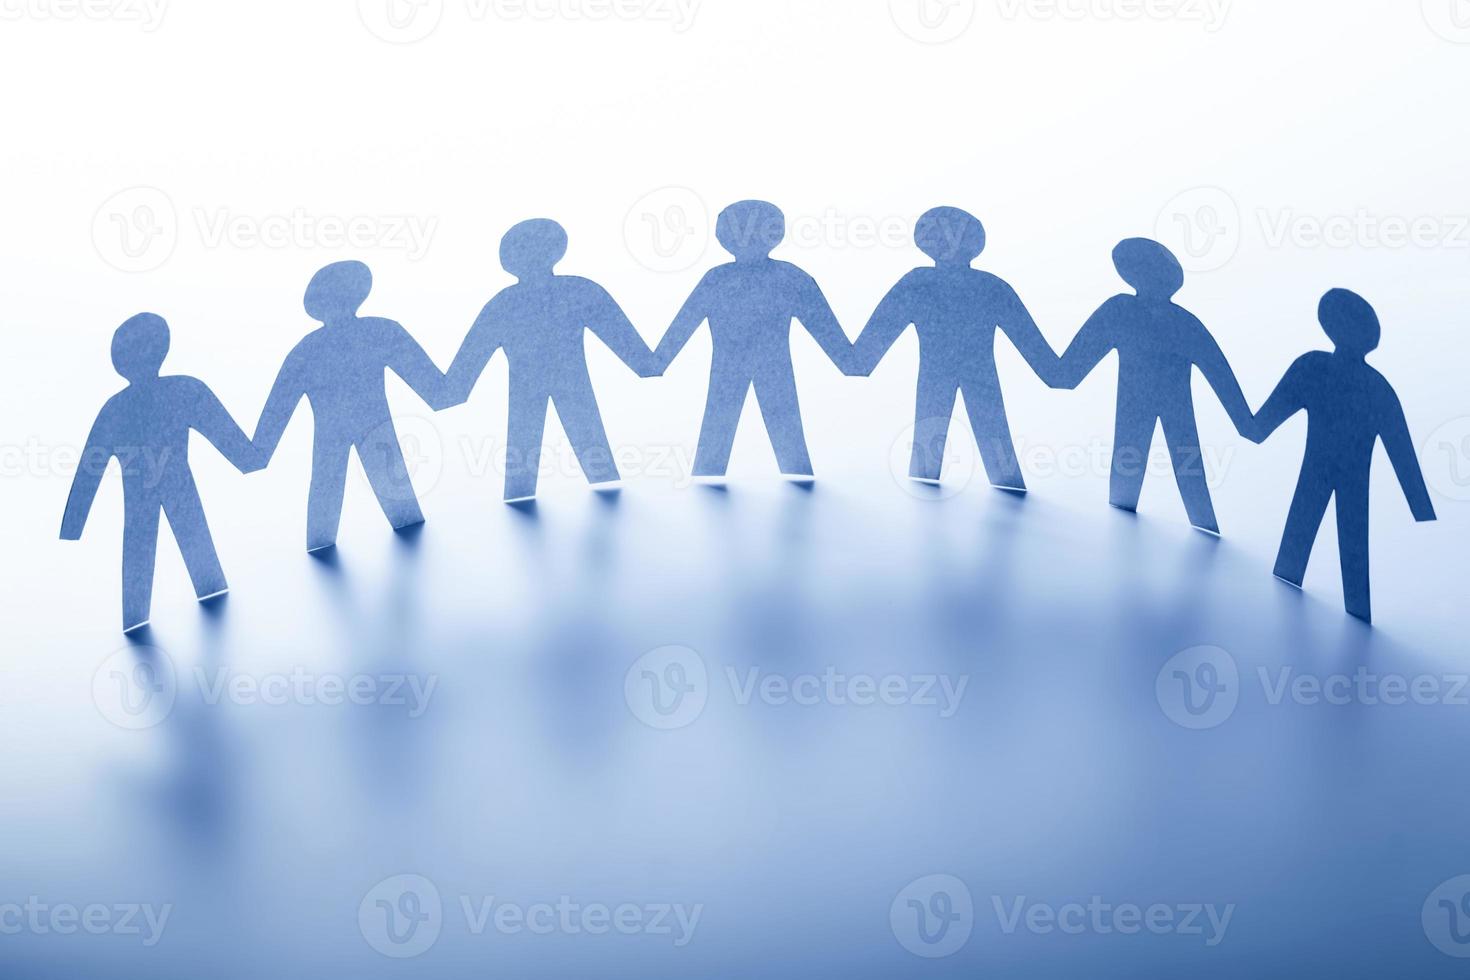 Paper people standing together hand in hand. Team, society, business concept photo